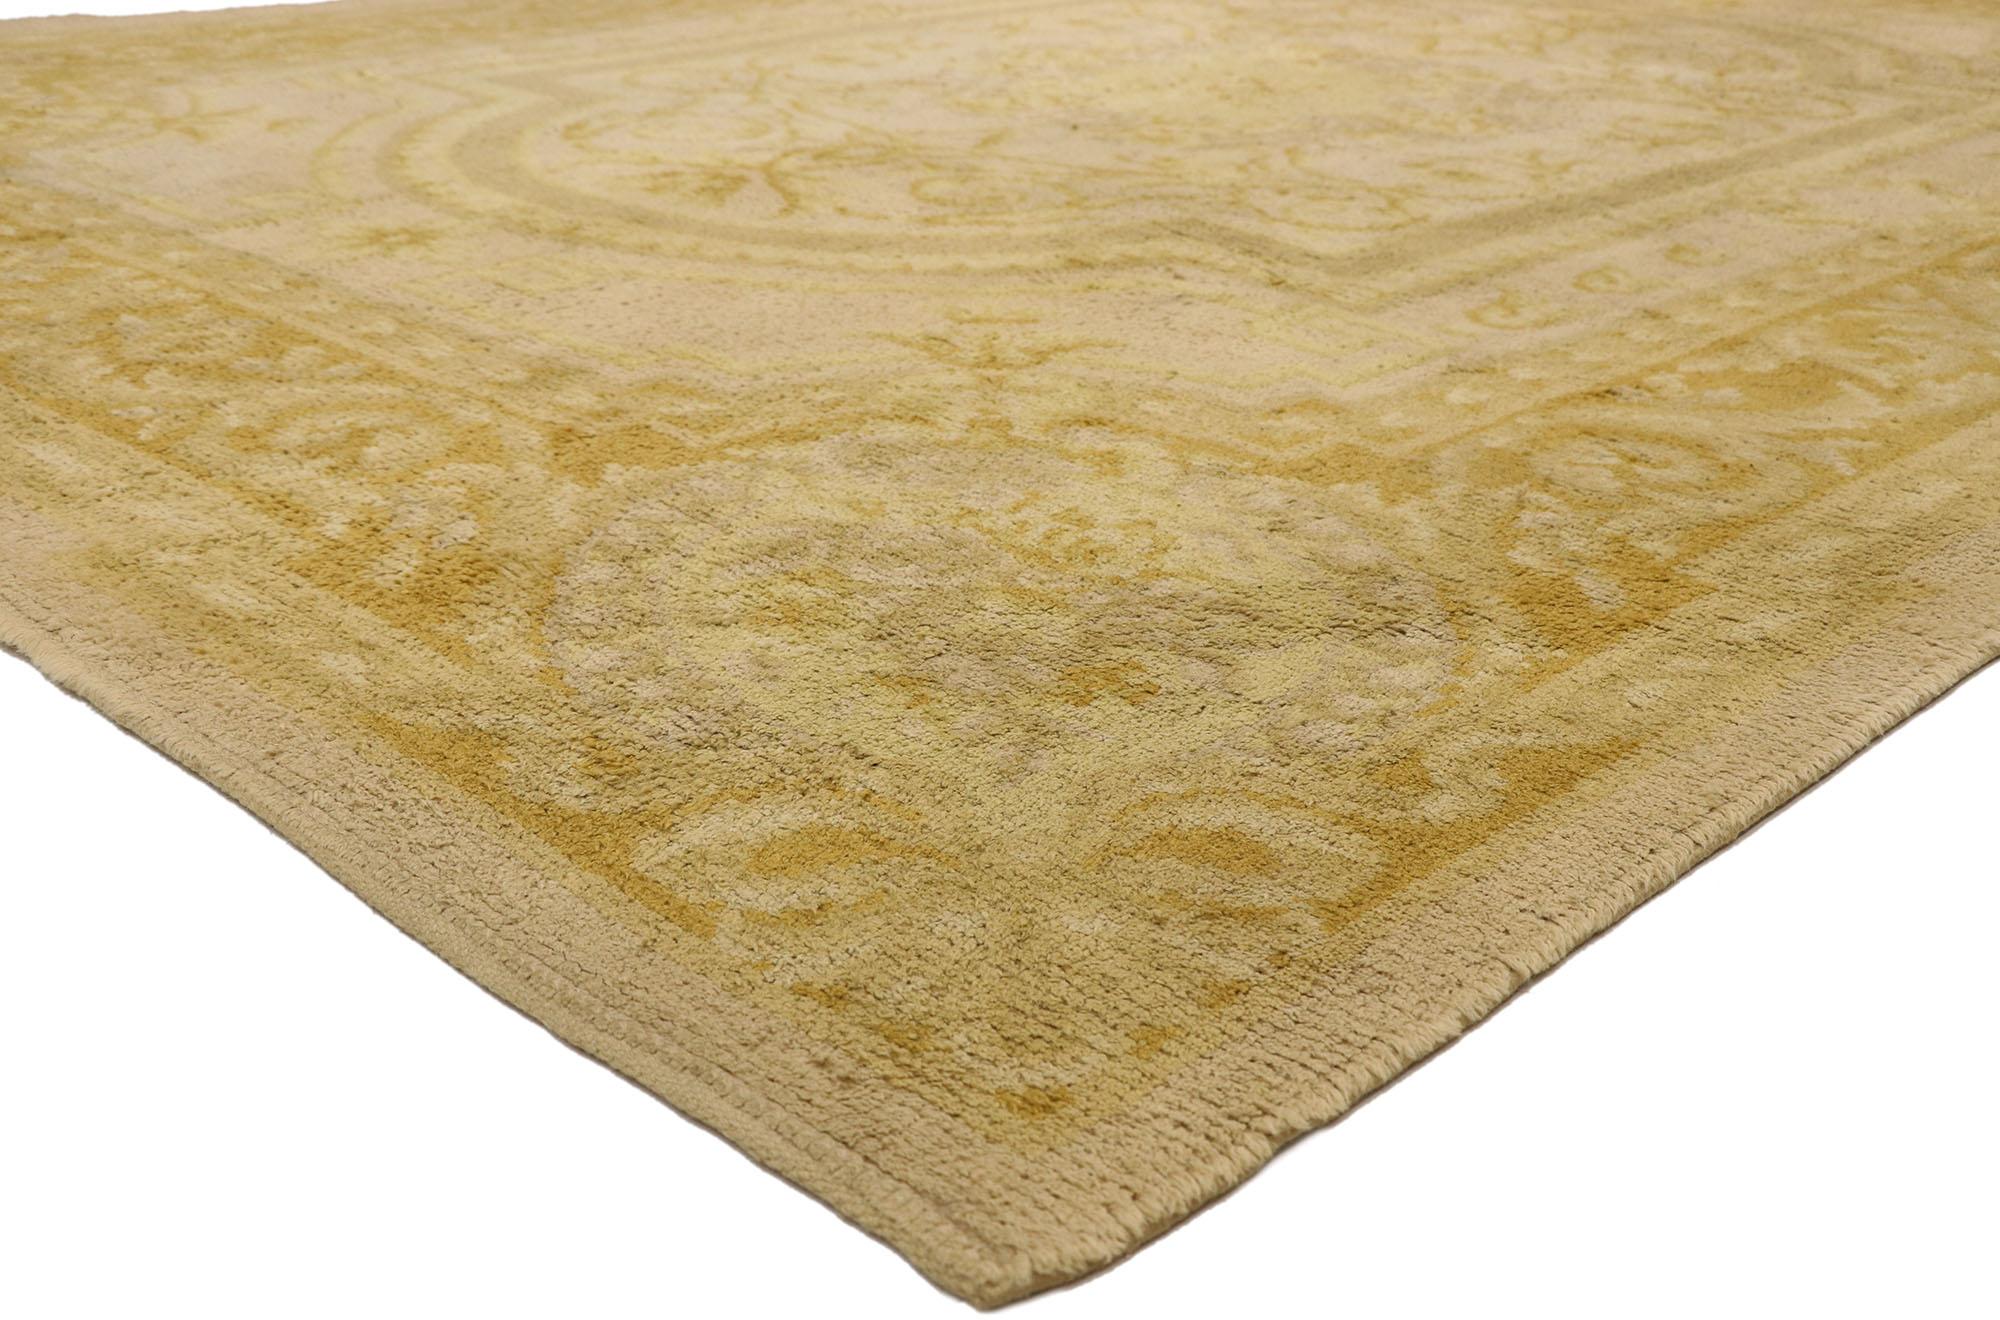 77421 antique Spanish Savonnerie rug with Louis XIV style. Regal and refined, this stunning hand-knotted wool Spanish Savonnerie rug beautifully highlights a regal Louis XIV aesthetic. It features an oval centre medallion patterned with stylized